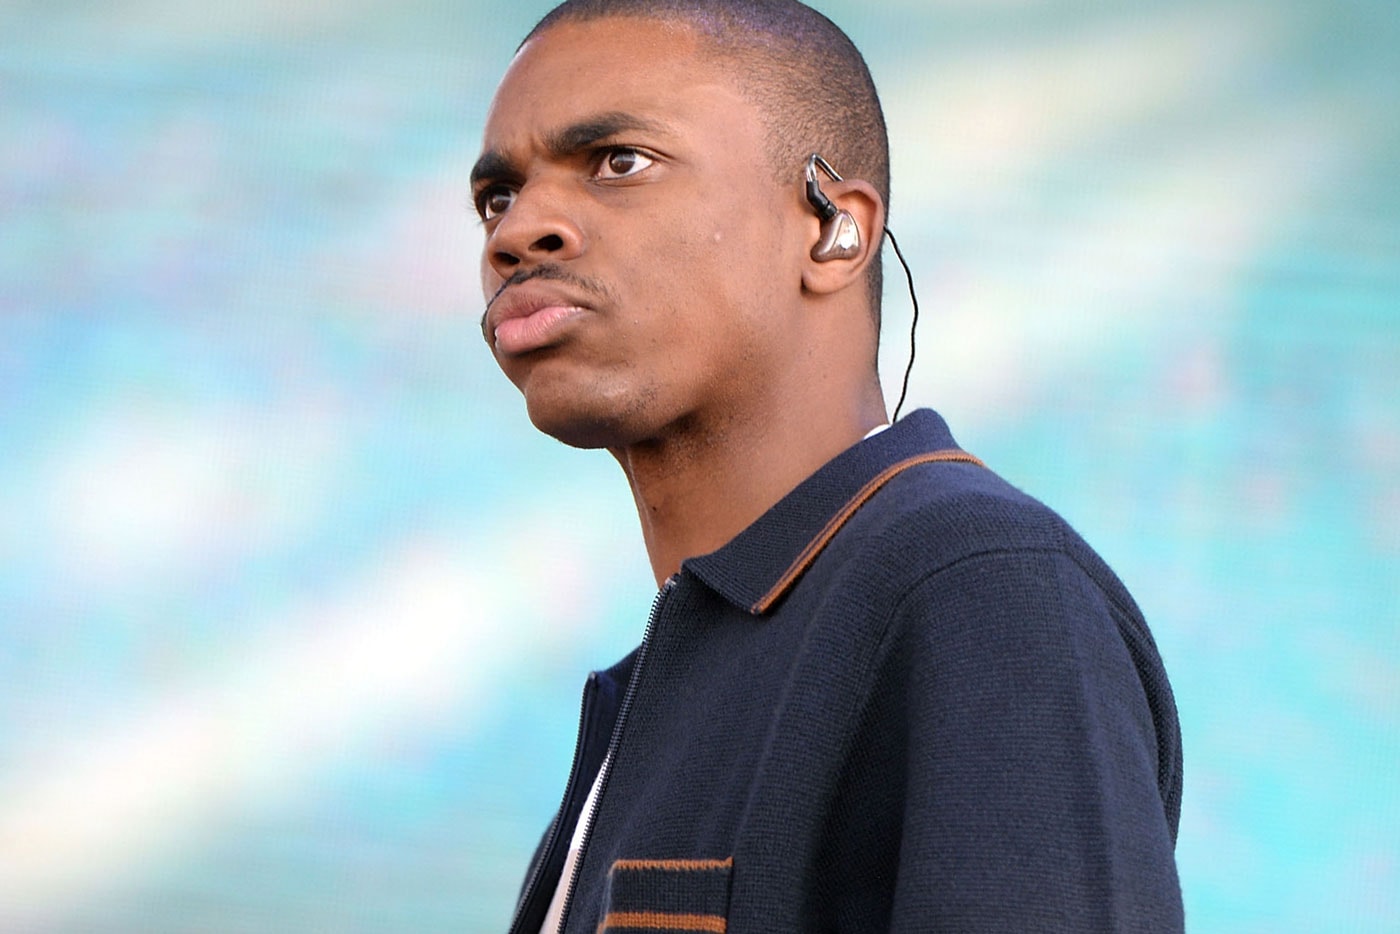 Vince Staples Joins James Blake for Remix of "Timeless"